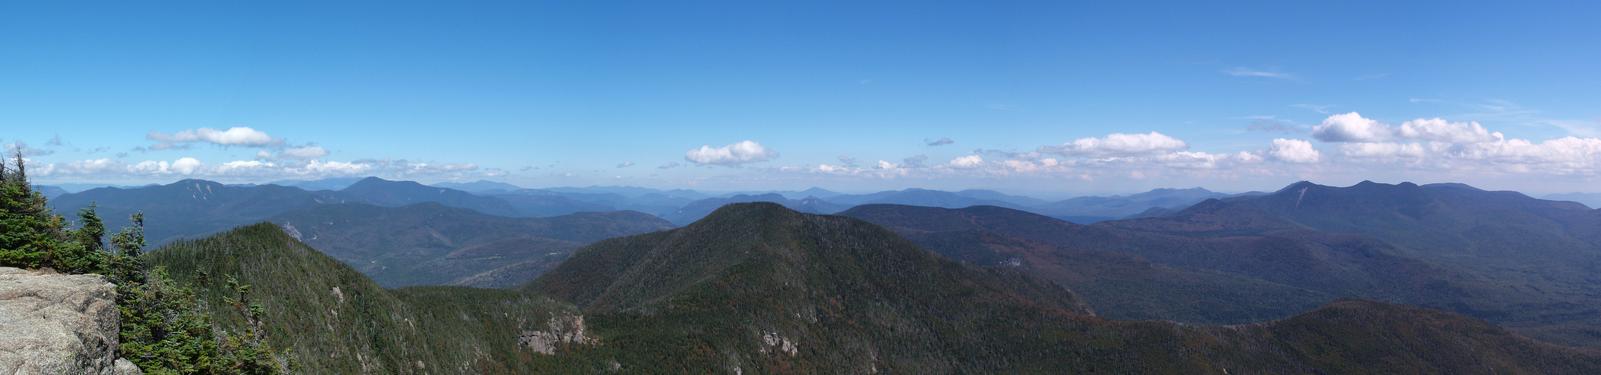 panoramic view from Mount Osceola in New Hampshire